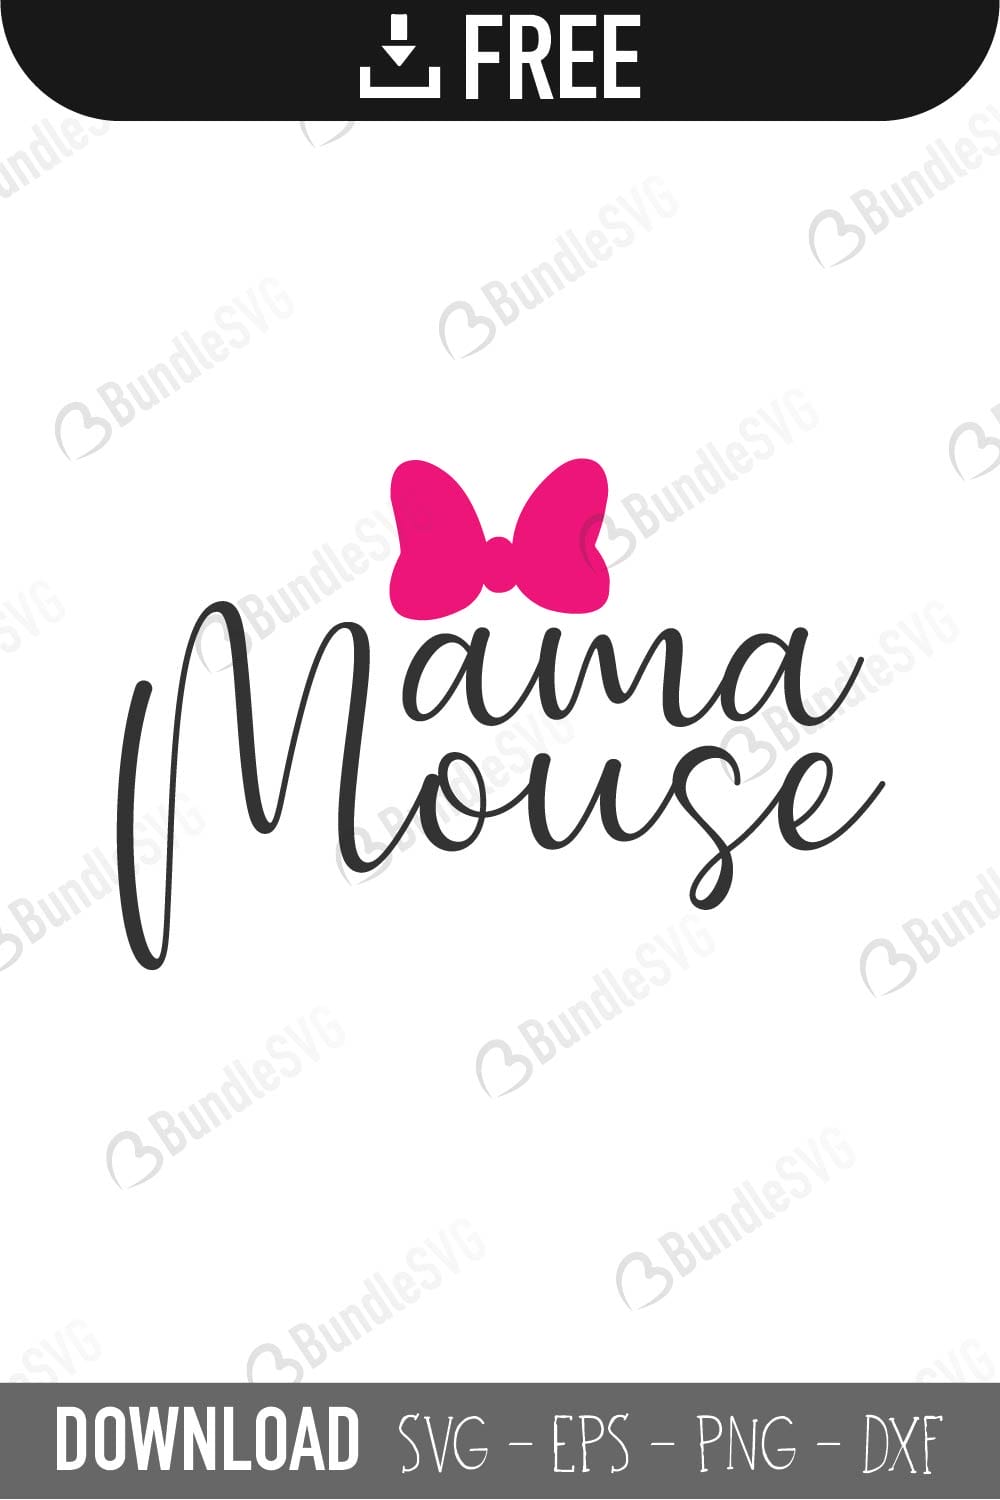 mama, mama mouse, minnie mouse bow svg, micky mouse svg free, micky, minnie, micky mouse, mouse ears, bow, mama mouse free, mama mouse download, mama mouse free svg, svg, design, cricut, silhouette, mama mouse svg cut files free, svg, cut files, svg, dxf, silhouette, vinyl, vector, free svg files,